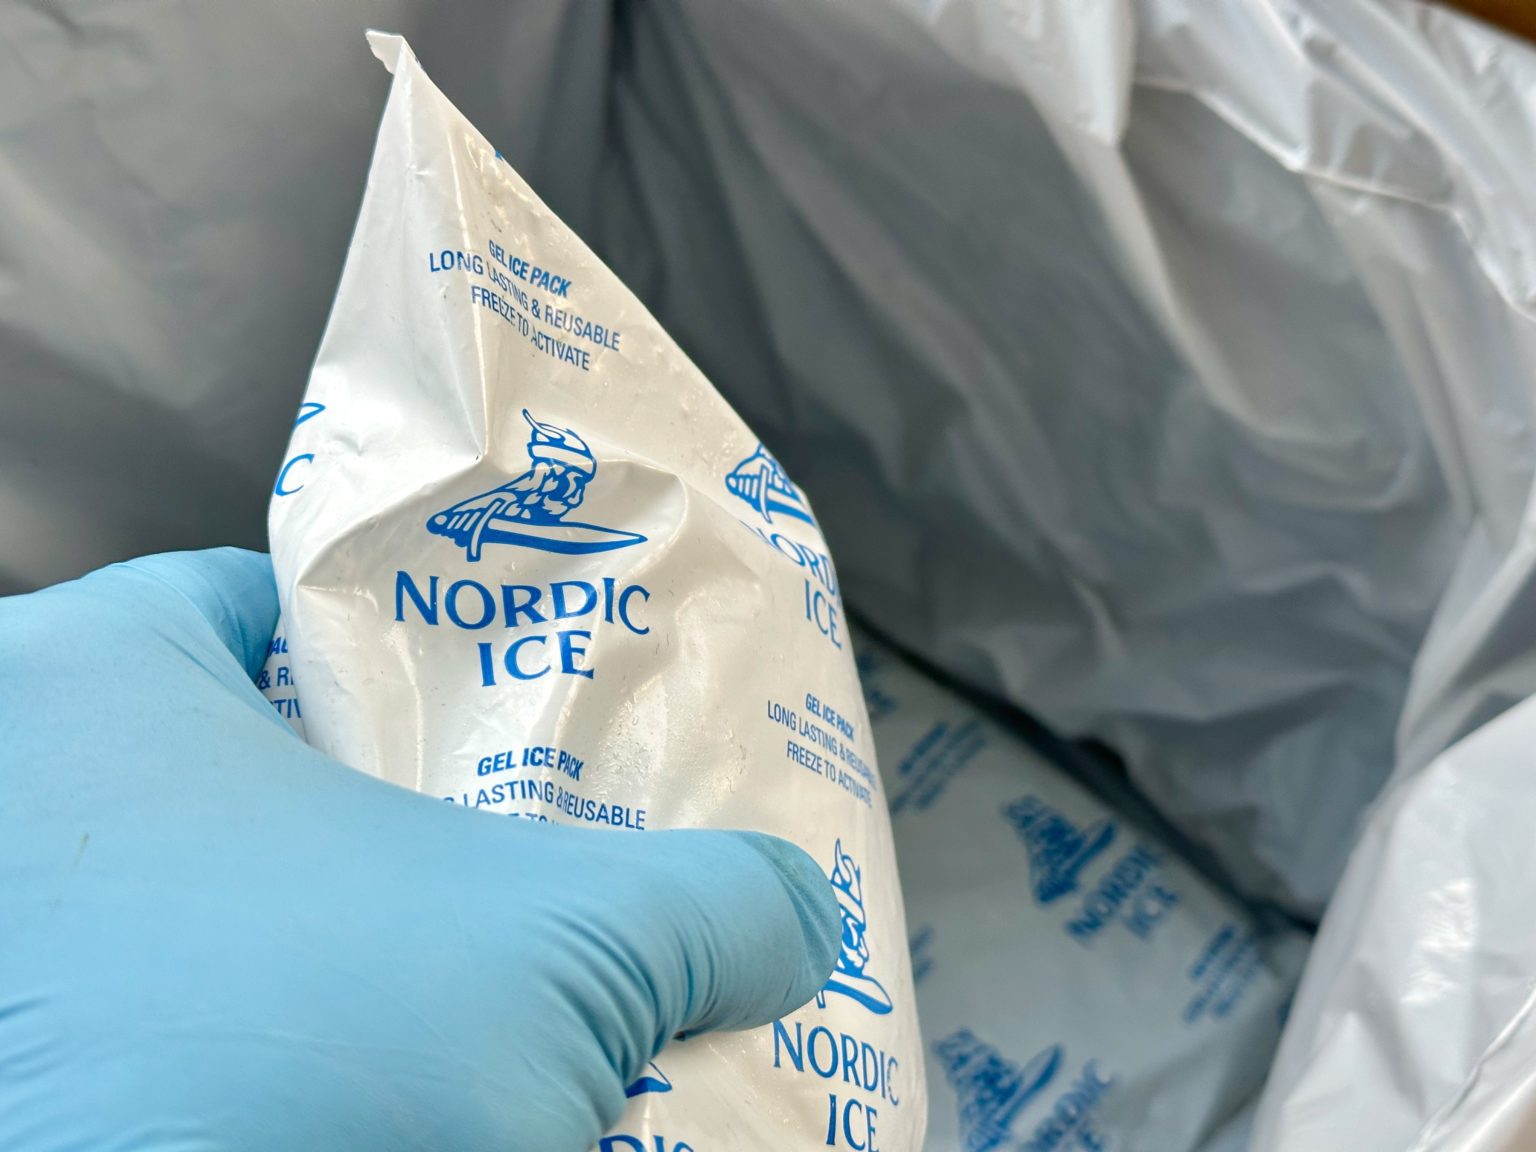 Nordic Cold Chain Solutions gel packs